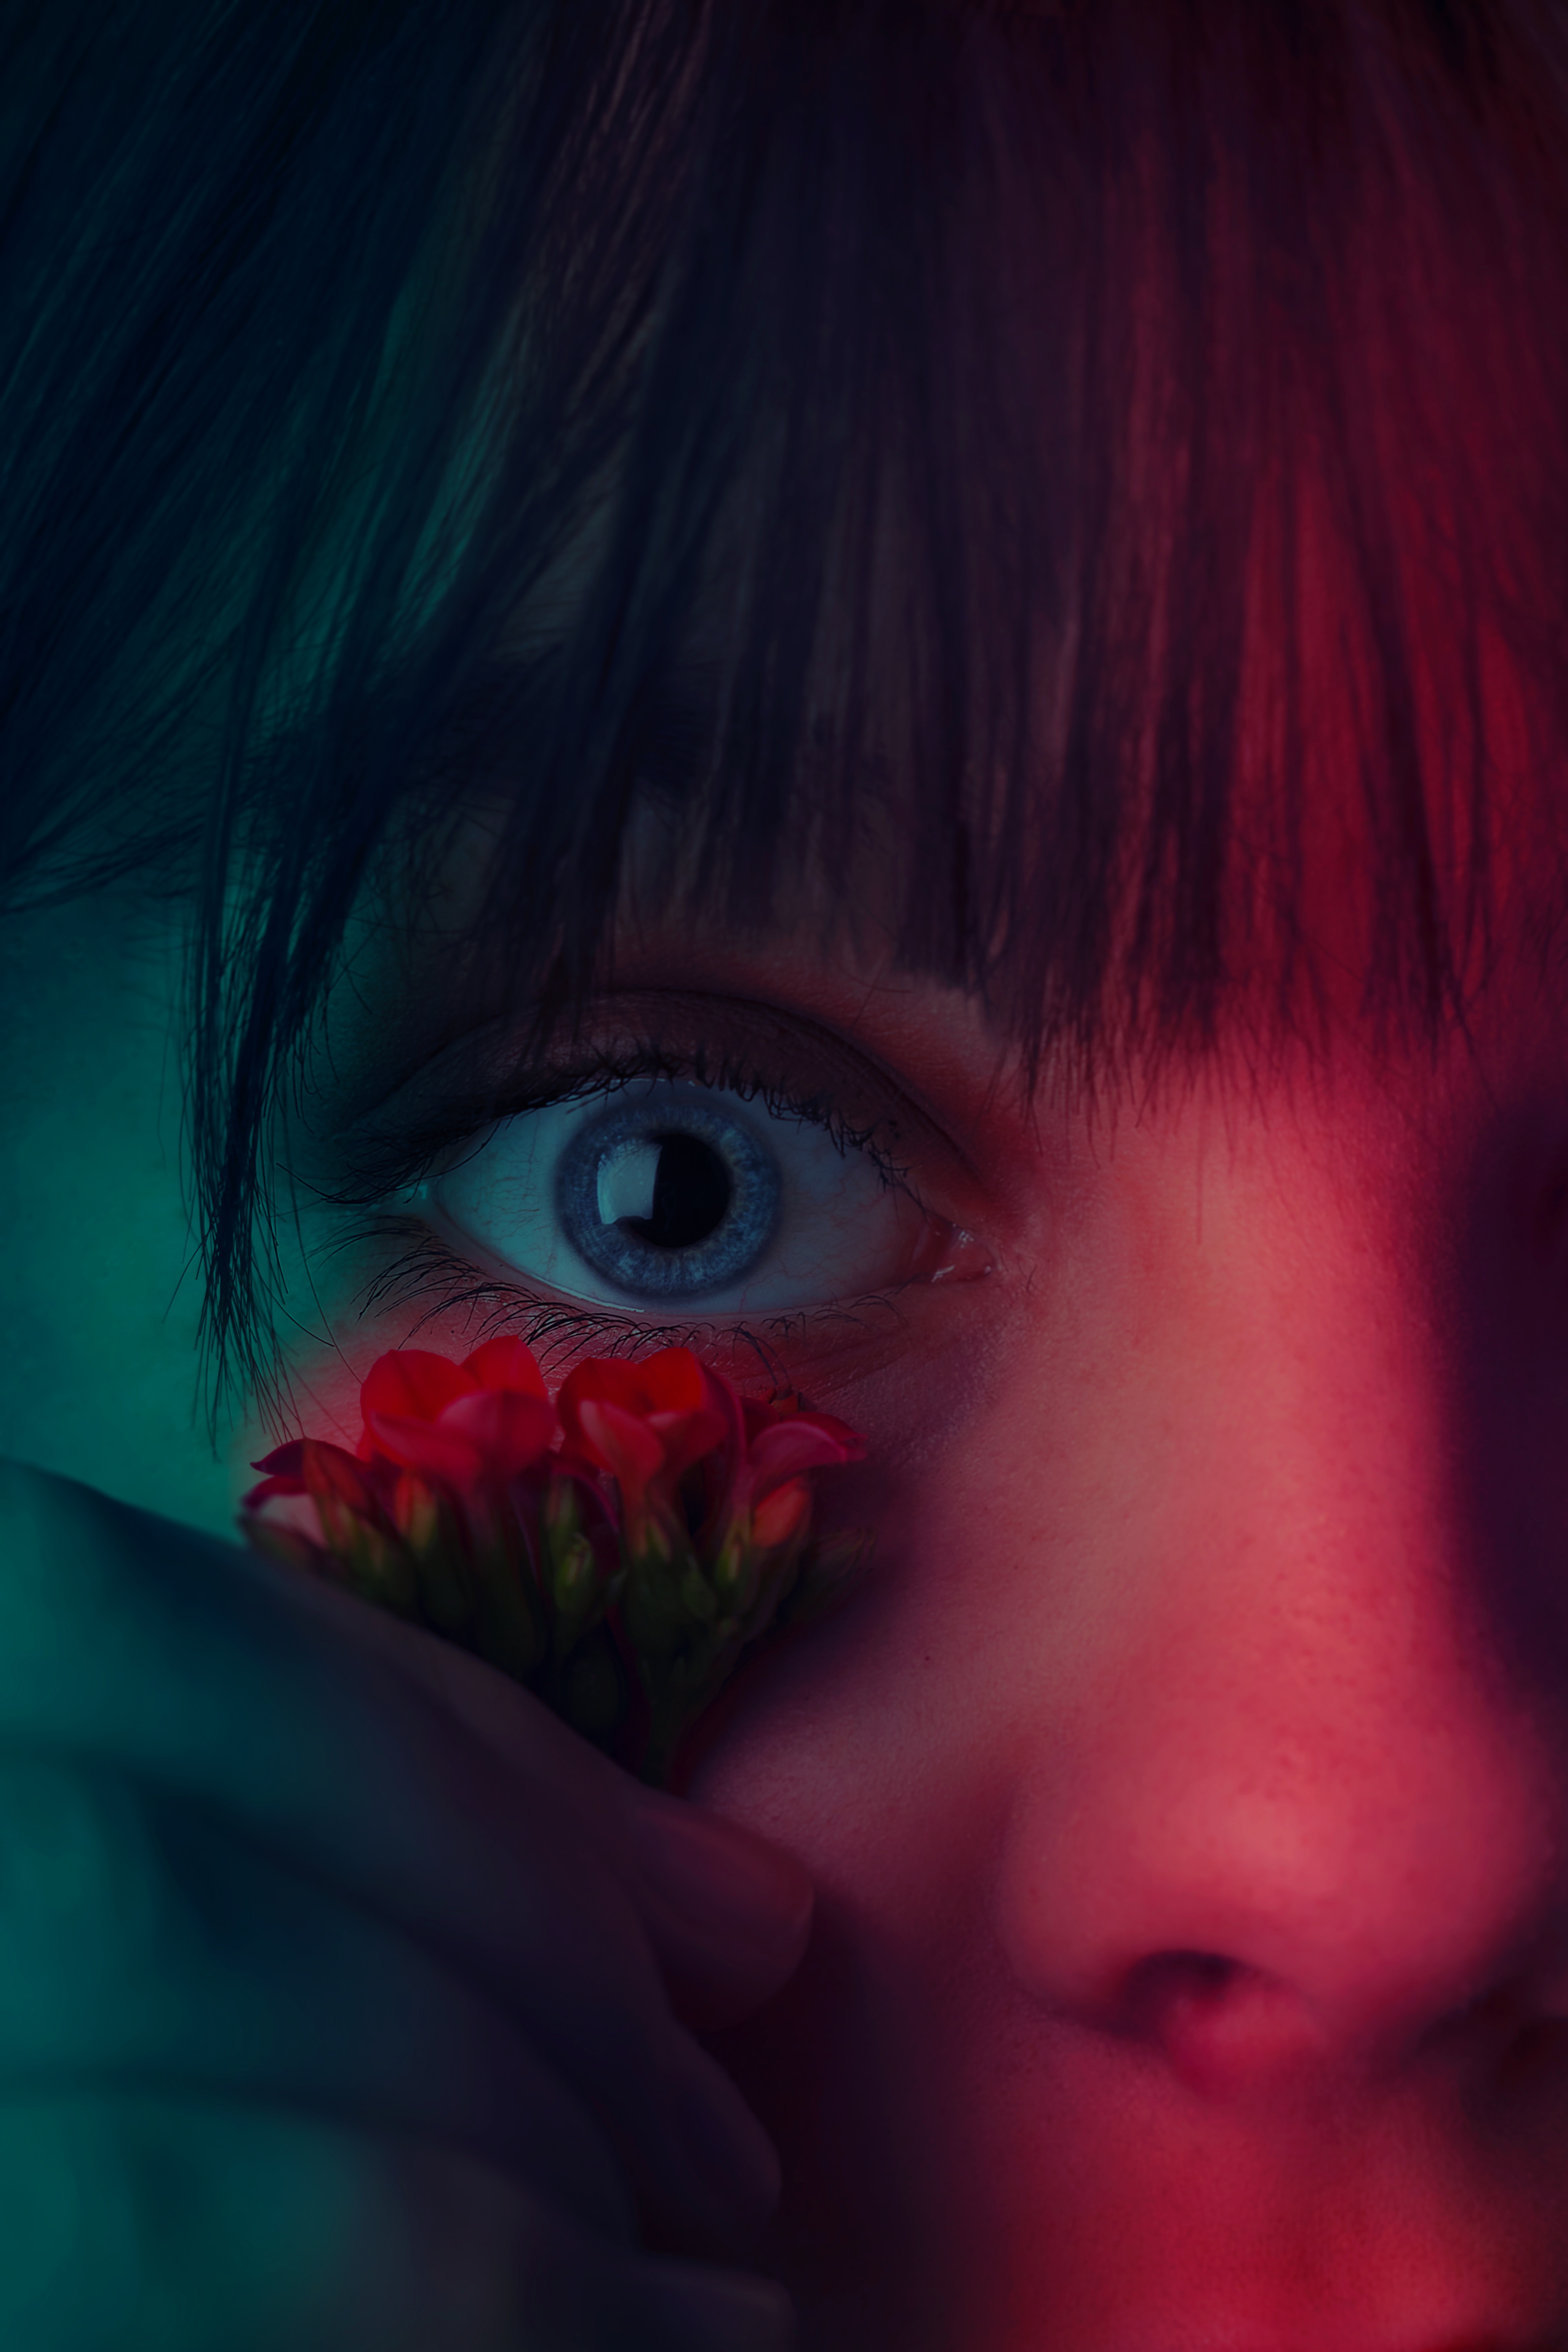 android face, flower, macro, close up, girl, eye